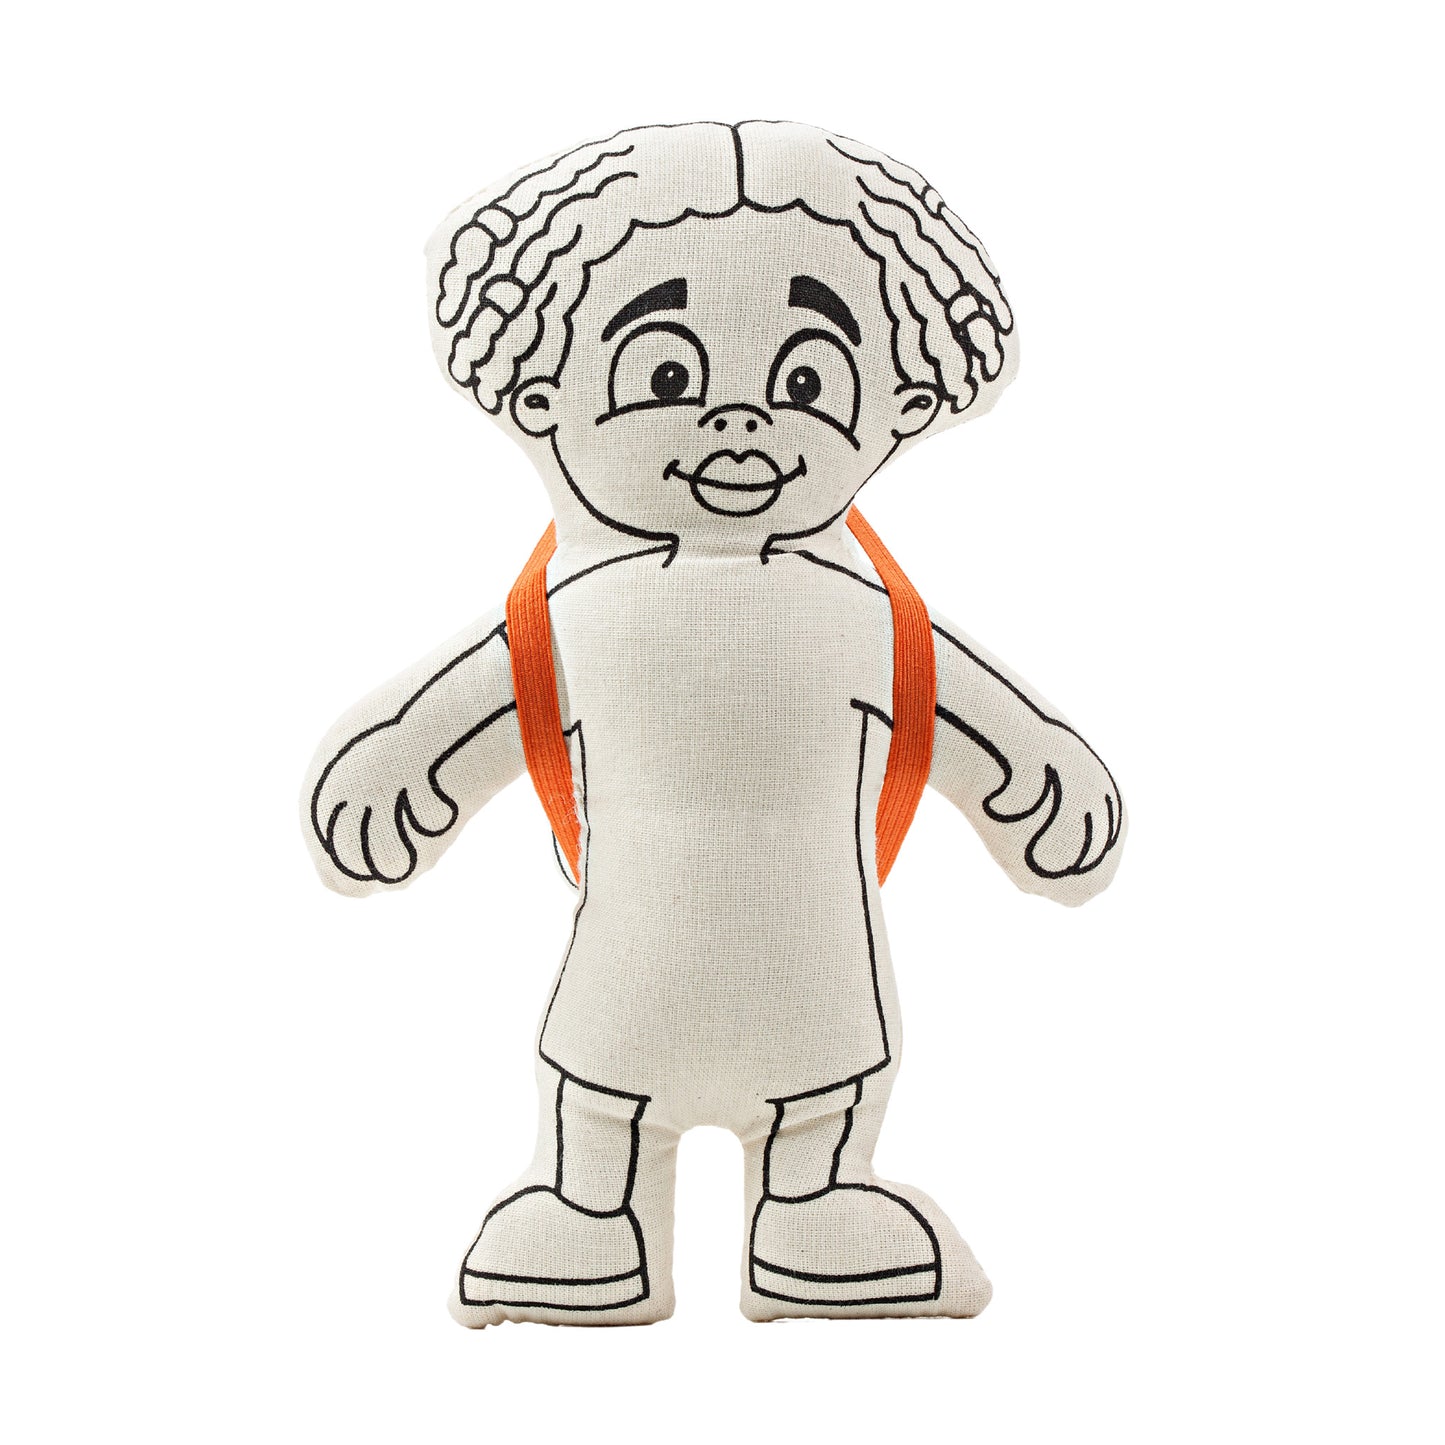 Doll for coloring - Gender Neutral - Kid with Locks